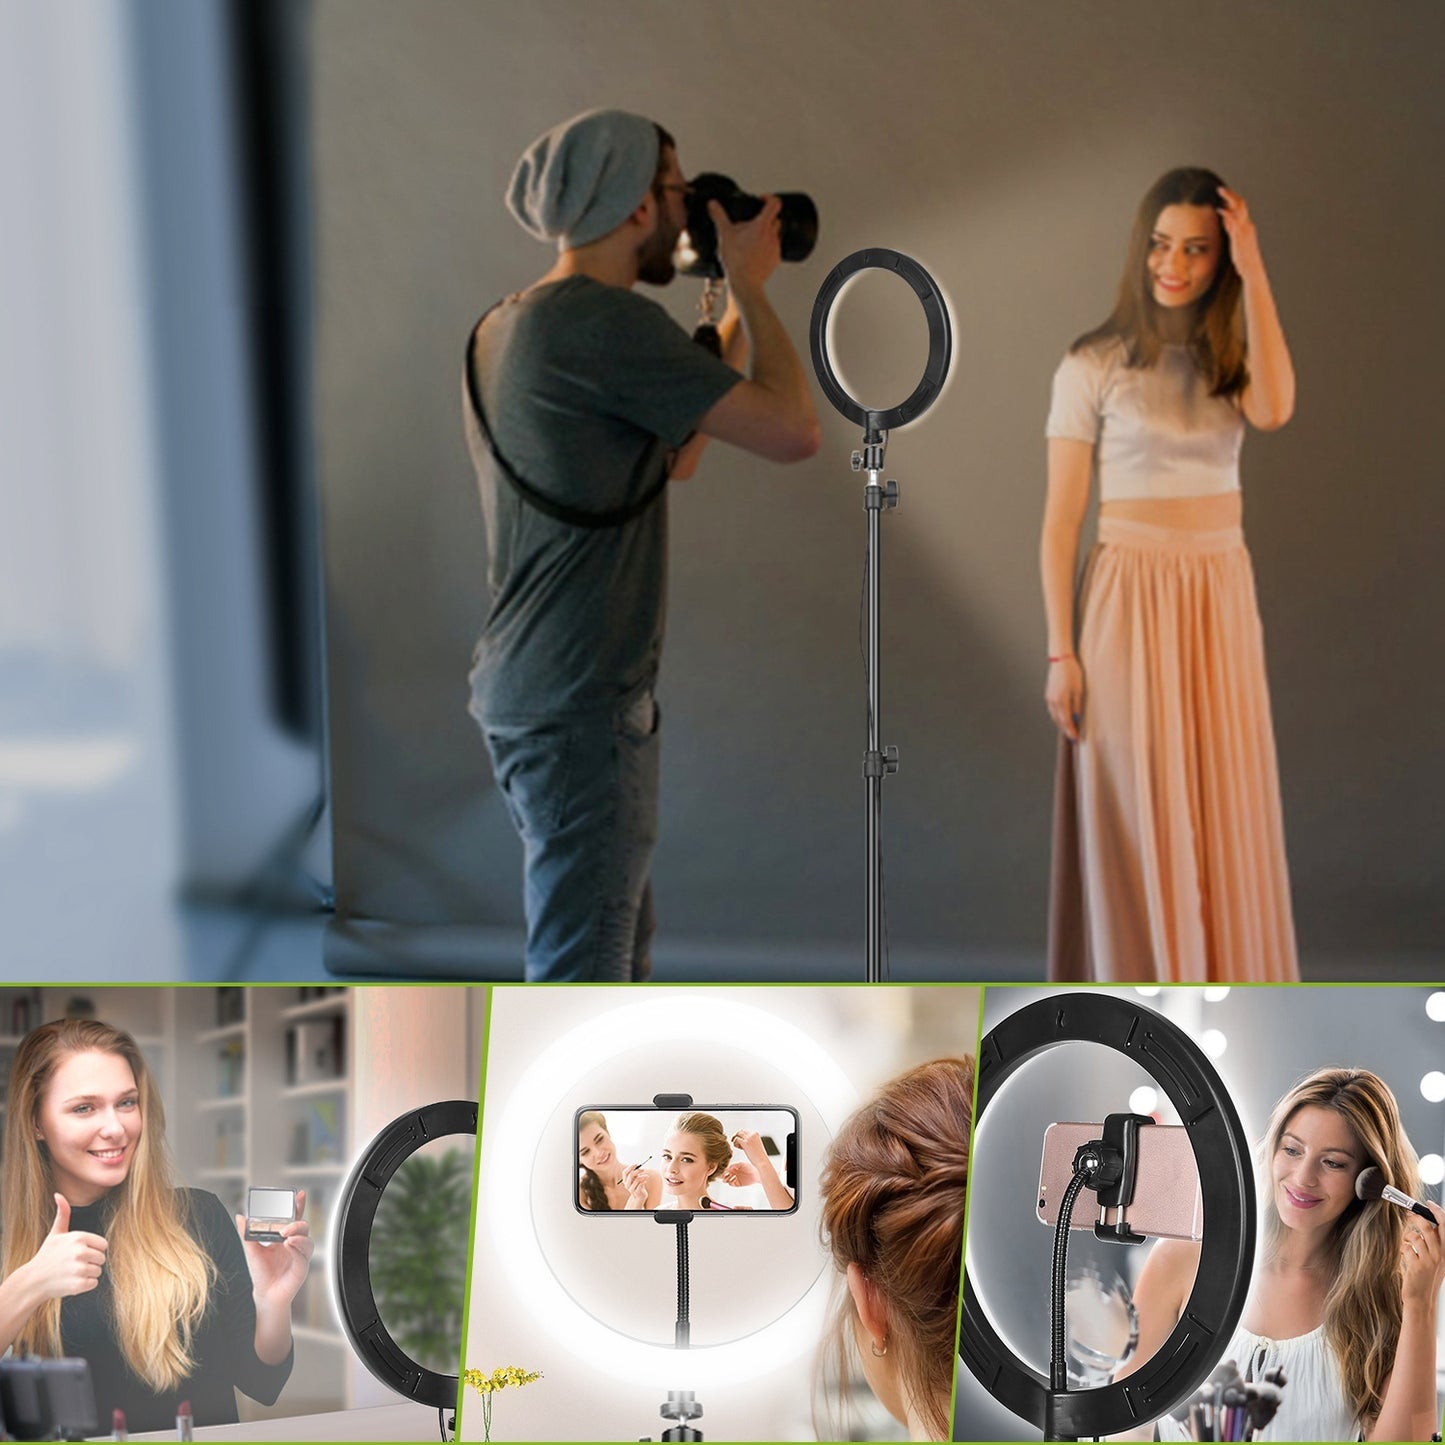 10in LED Selfie Ring Light Dimmable 120 LEDs Makeup Ring Lights w/ Adjustable Tripod Stand Cell Phone Holder USB Powered For YouTube Video/Live Stream/Makeup/Photography